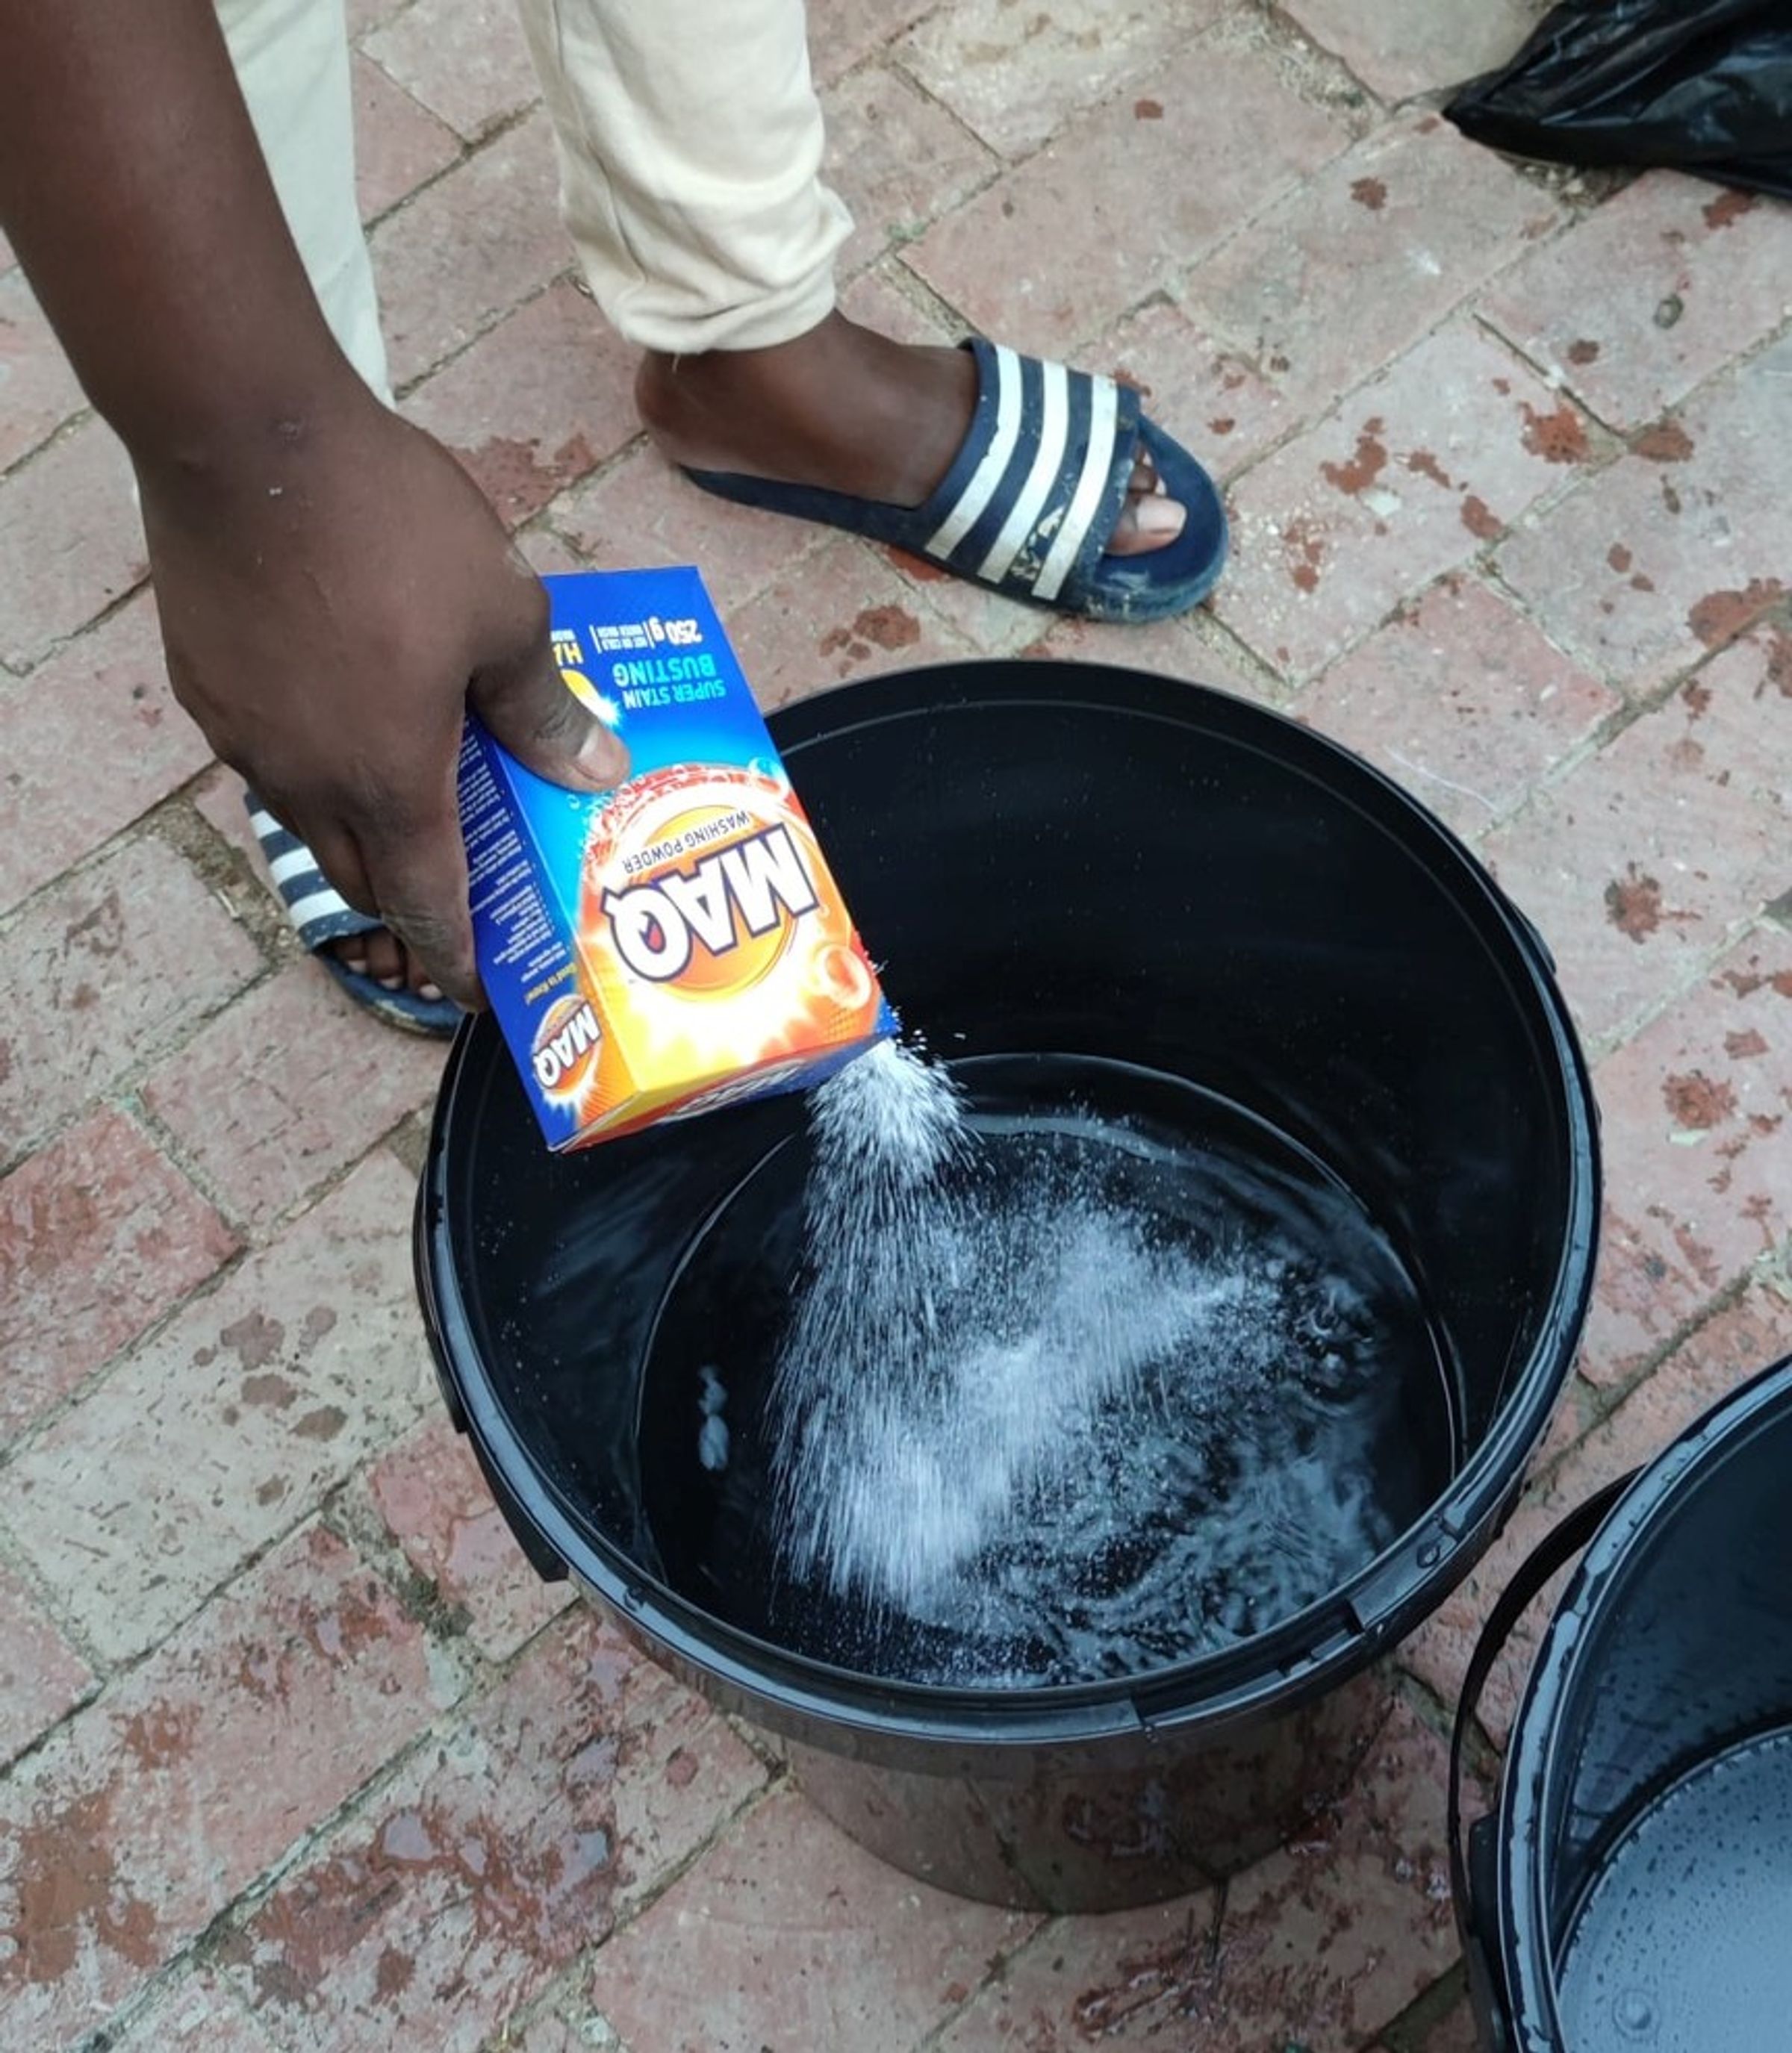 Putting some detergent into a half-full bucket